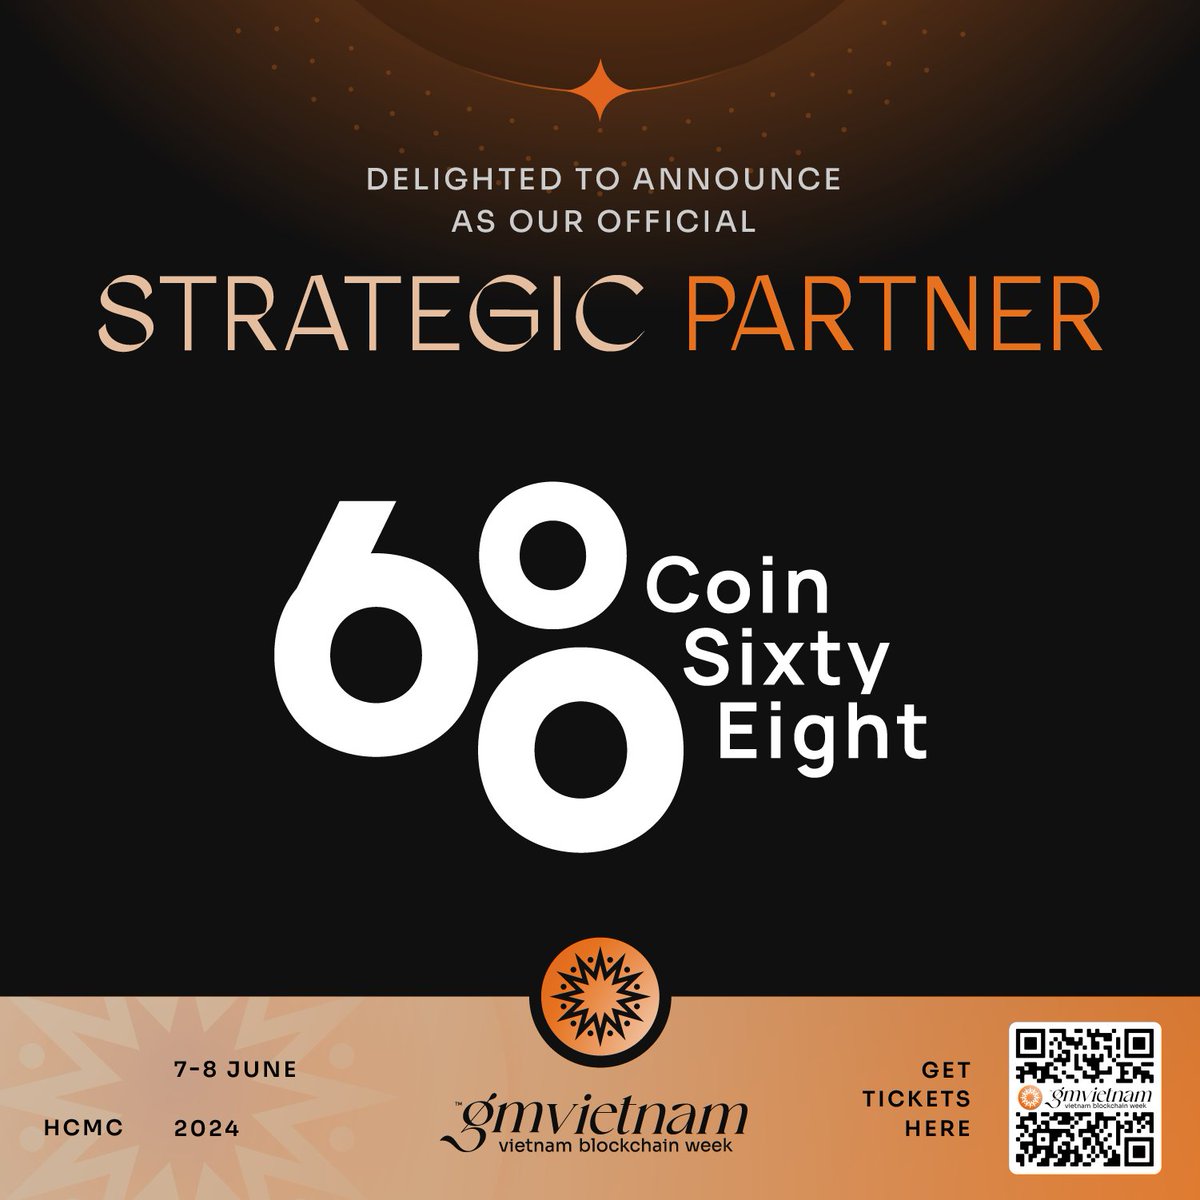 Staying crypto-savvy in Vietnam? Look no further than @coin68. We're excited to have them on board as a Strategic Partner. This leading news platform keeps you up-to-date on the latest in DeFi, Bitcoin, Ethereum, and all things blockchain. 📌 gmvietnam.io/get-tickets